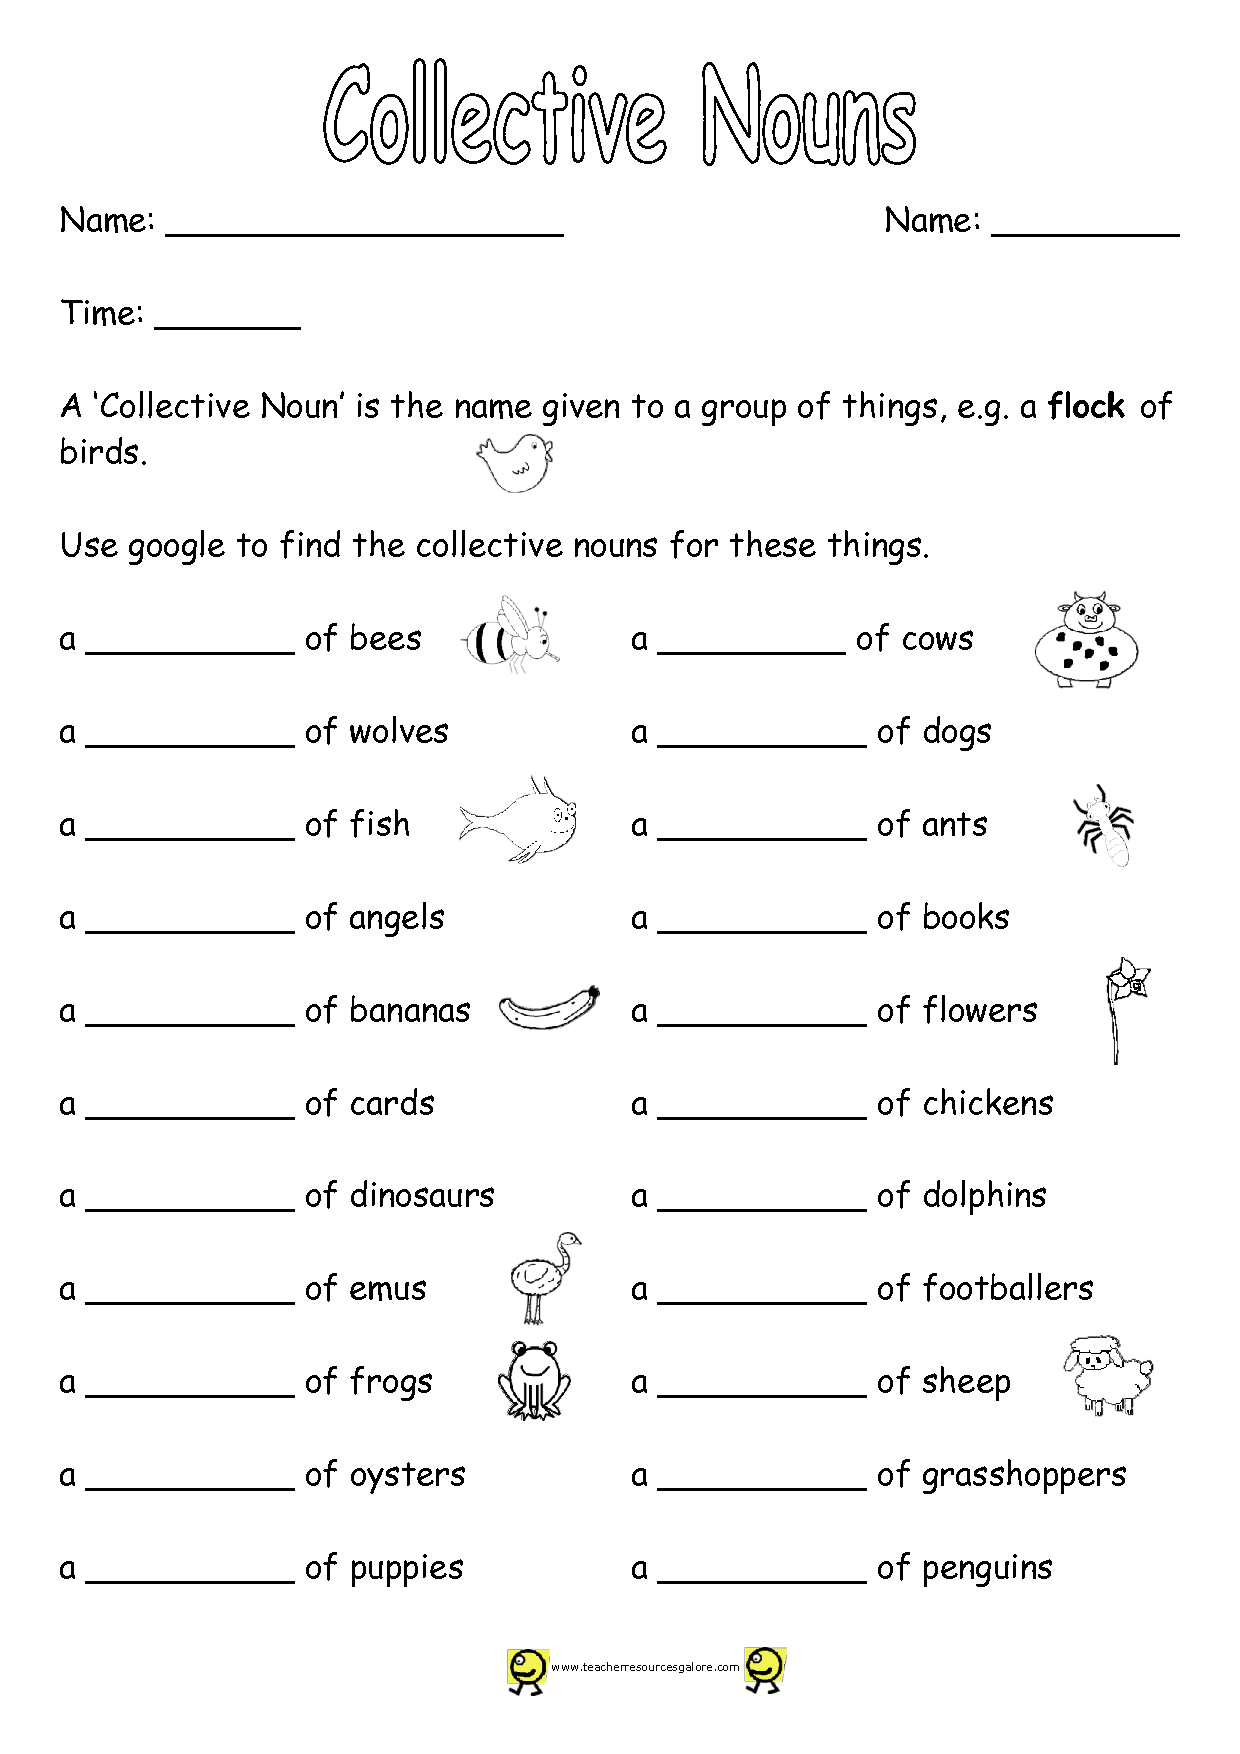 Collective Nouns Worksheets Second Grade